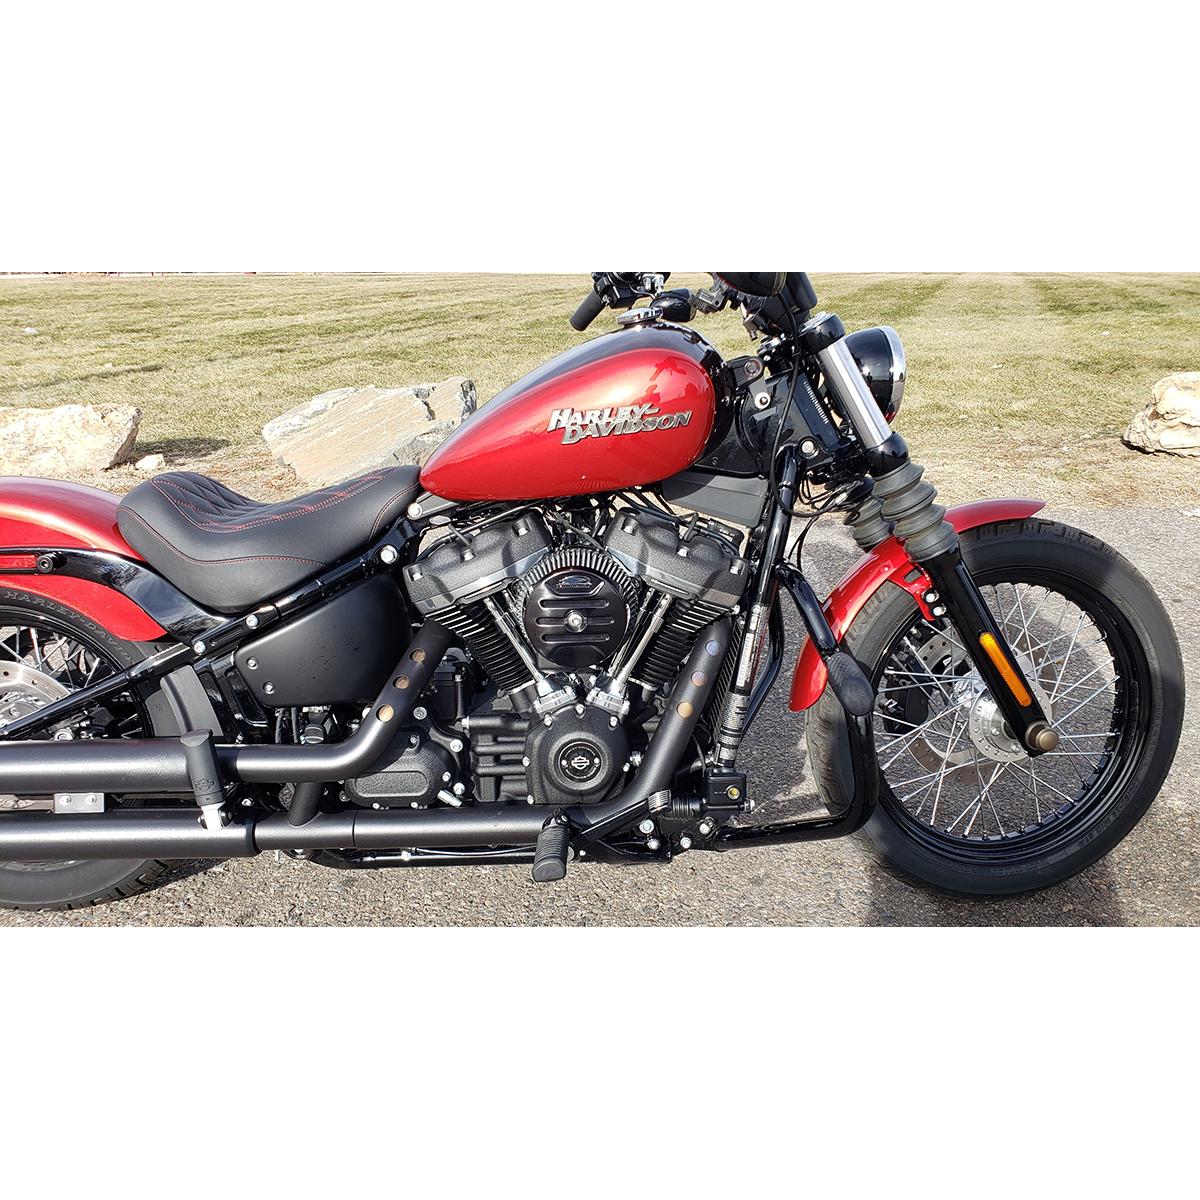 Gas Tank Lift Kit for Softail Standard FXST 2020-up